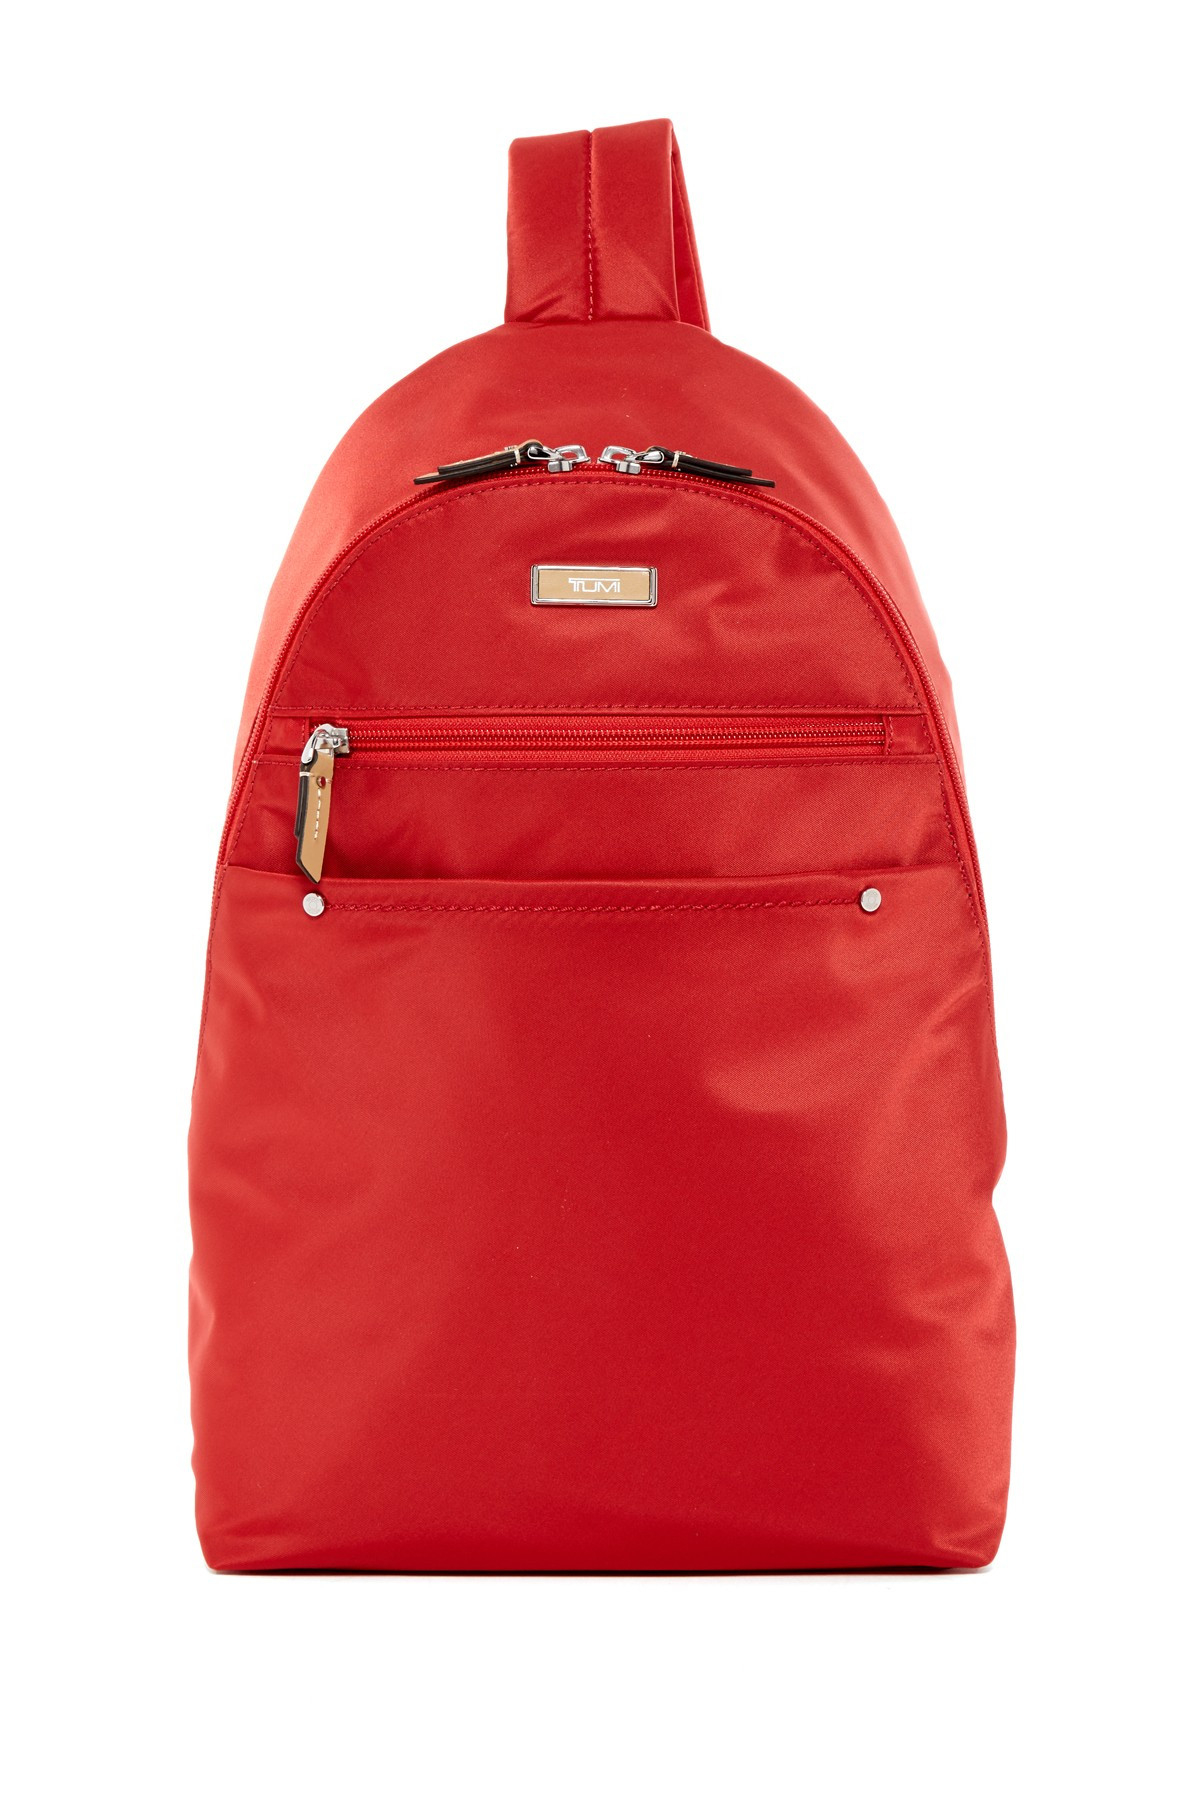 Lyst - Tumi Nylon Luxor Sling Backpack in Red